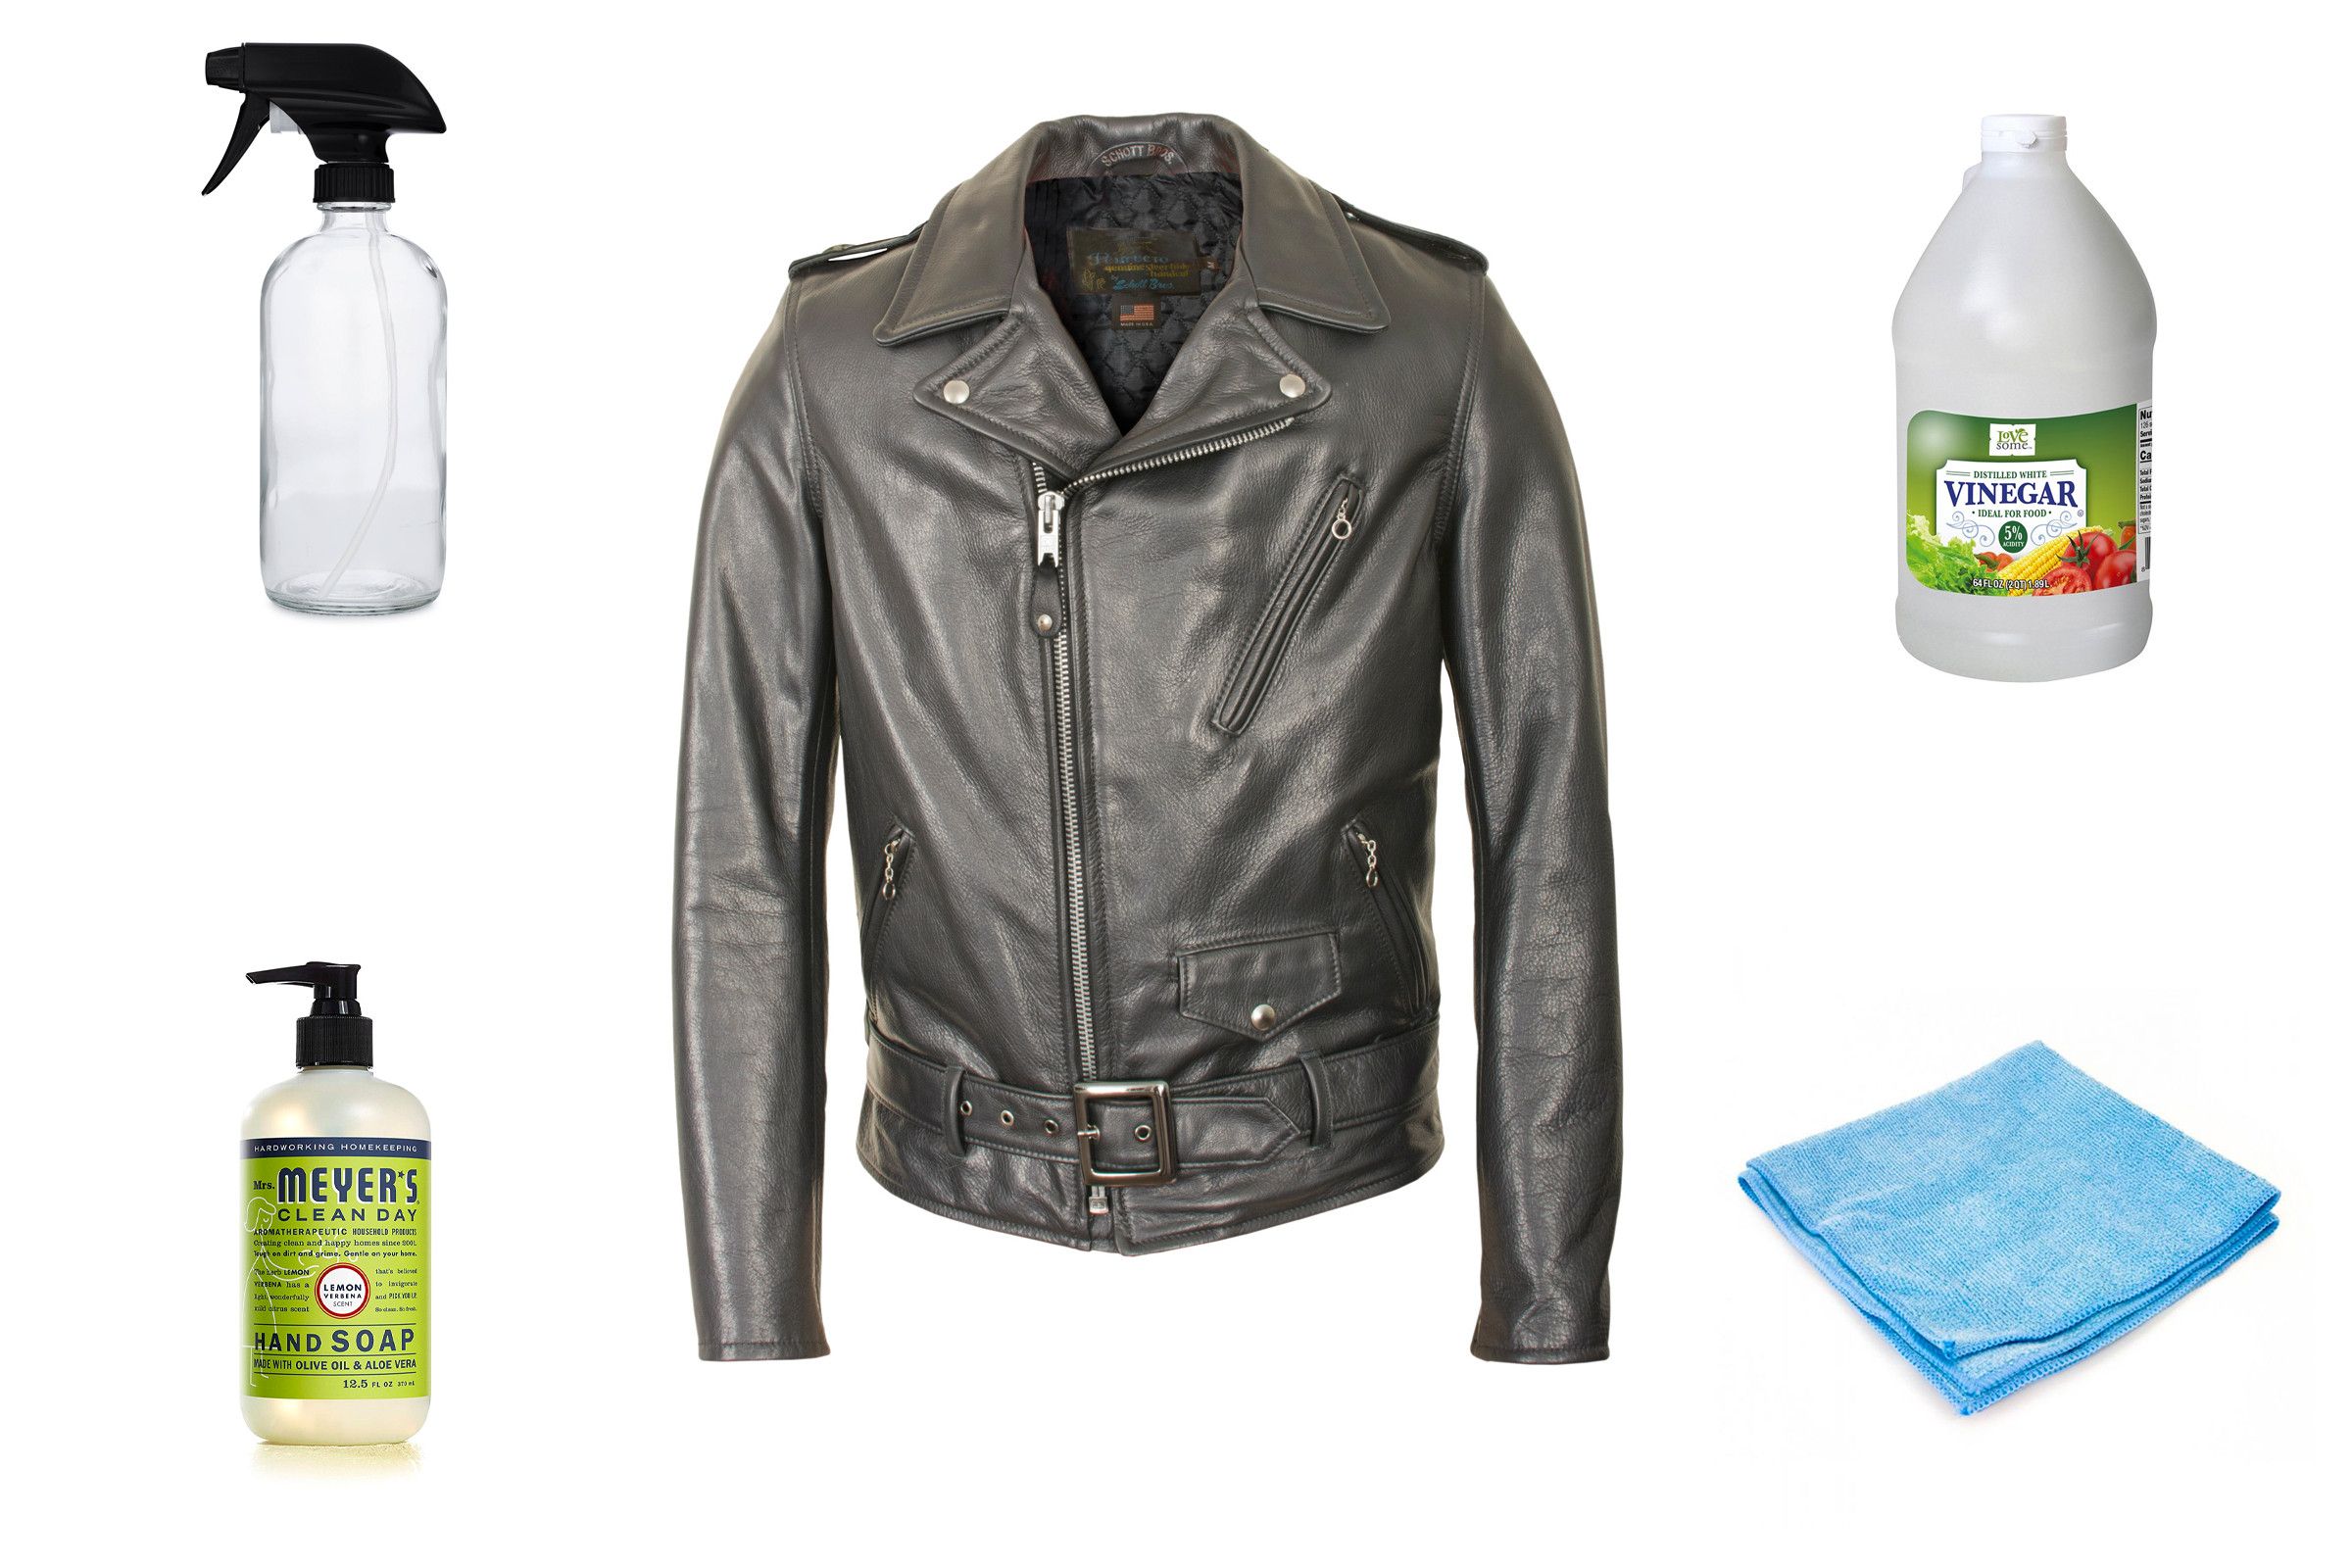 Removing Stains from Your Leather Jacket